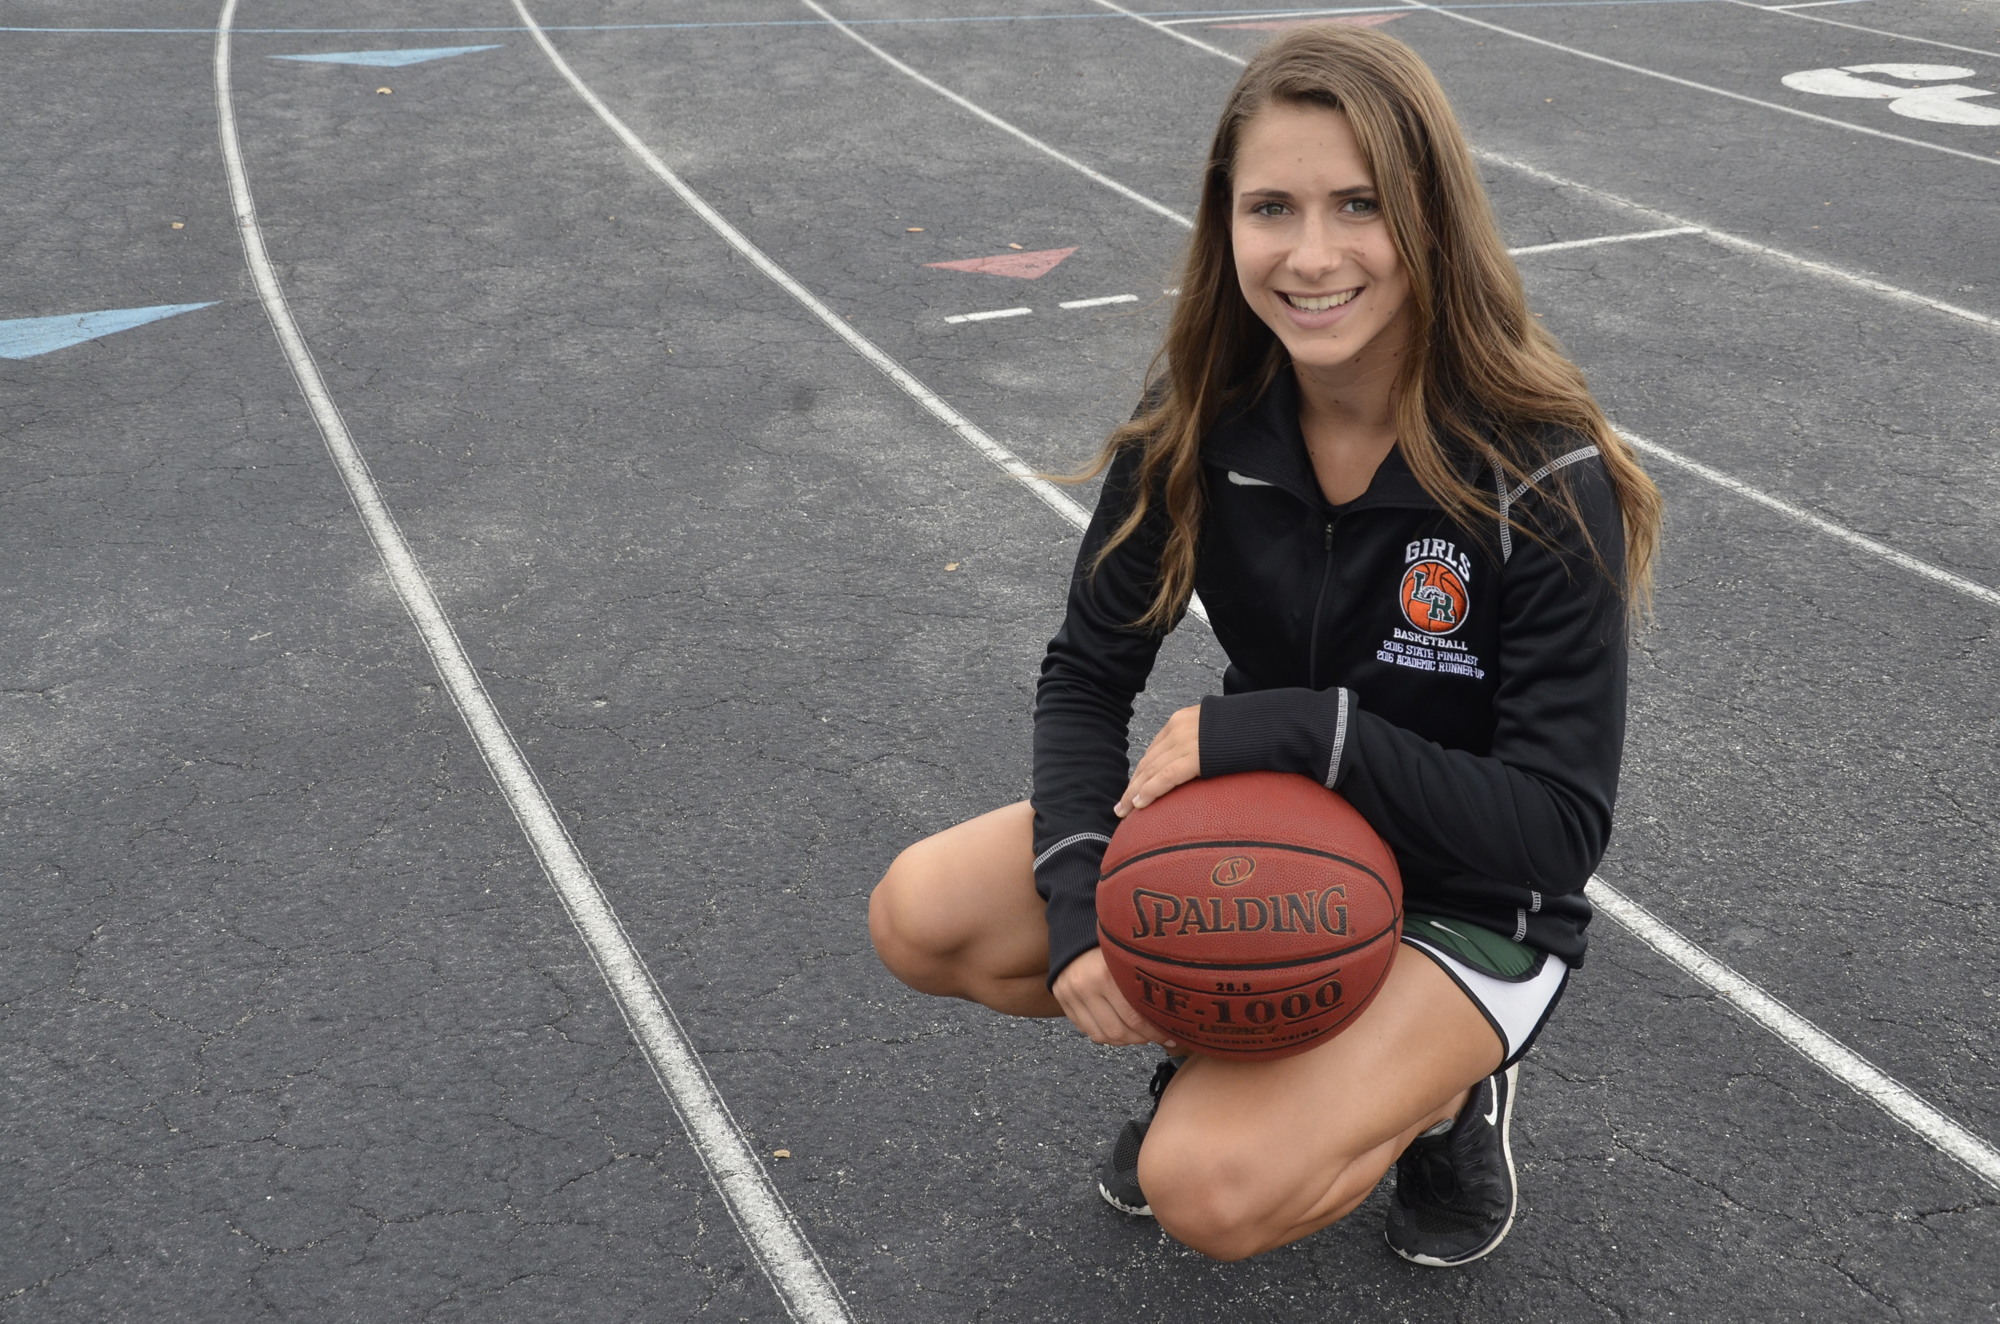 Kailyn Scully has lead her team to the highest level in school history, but has no plans to continue with basketball.